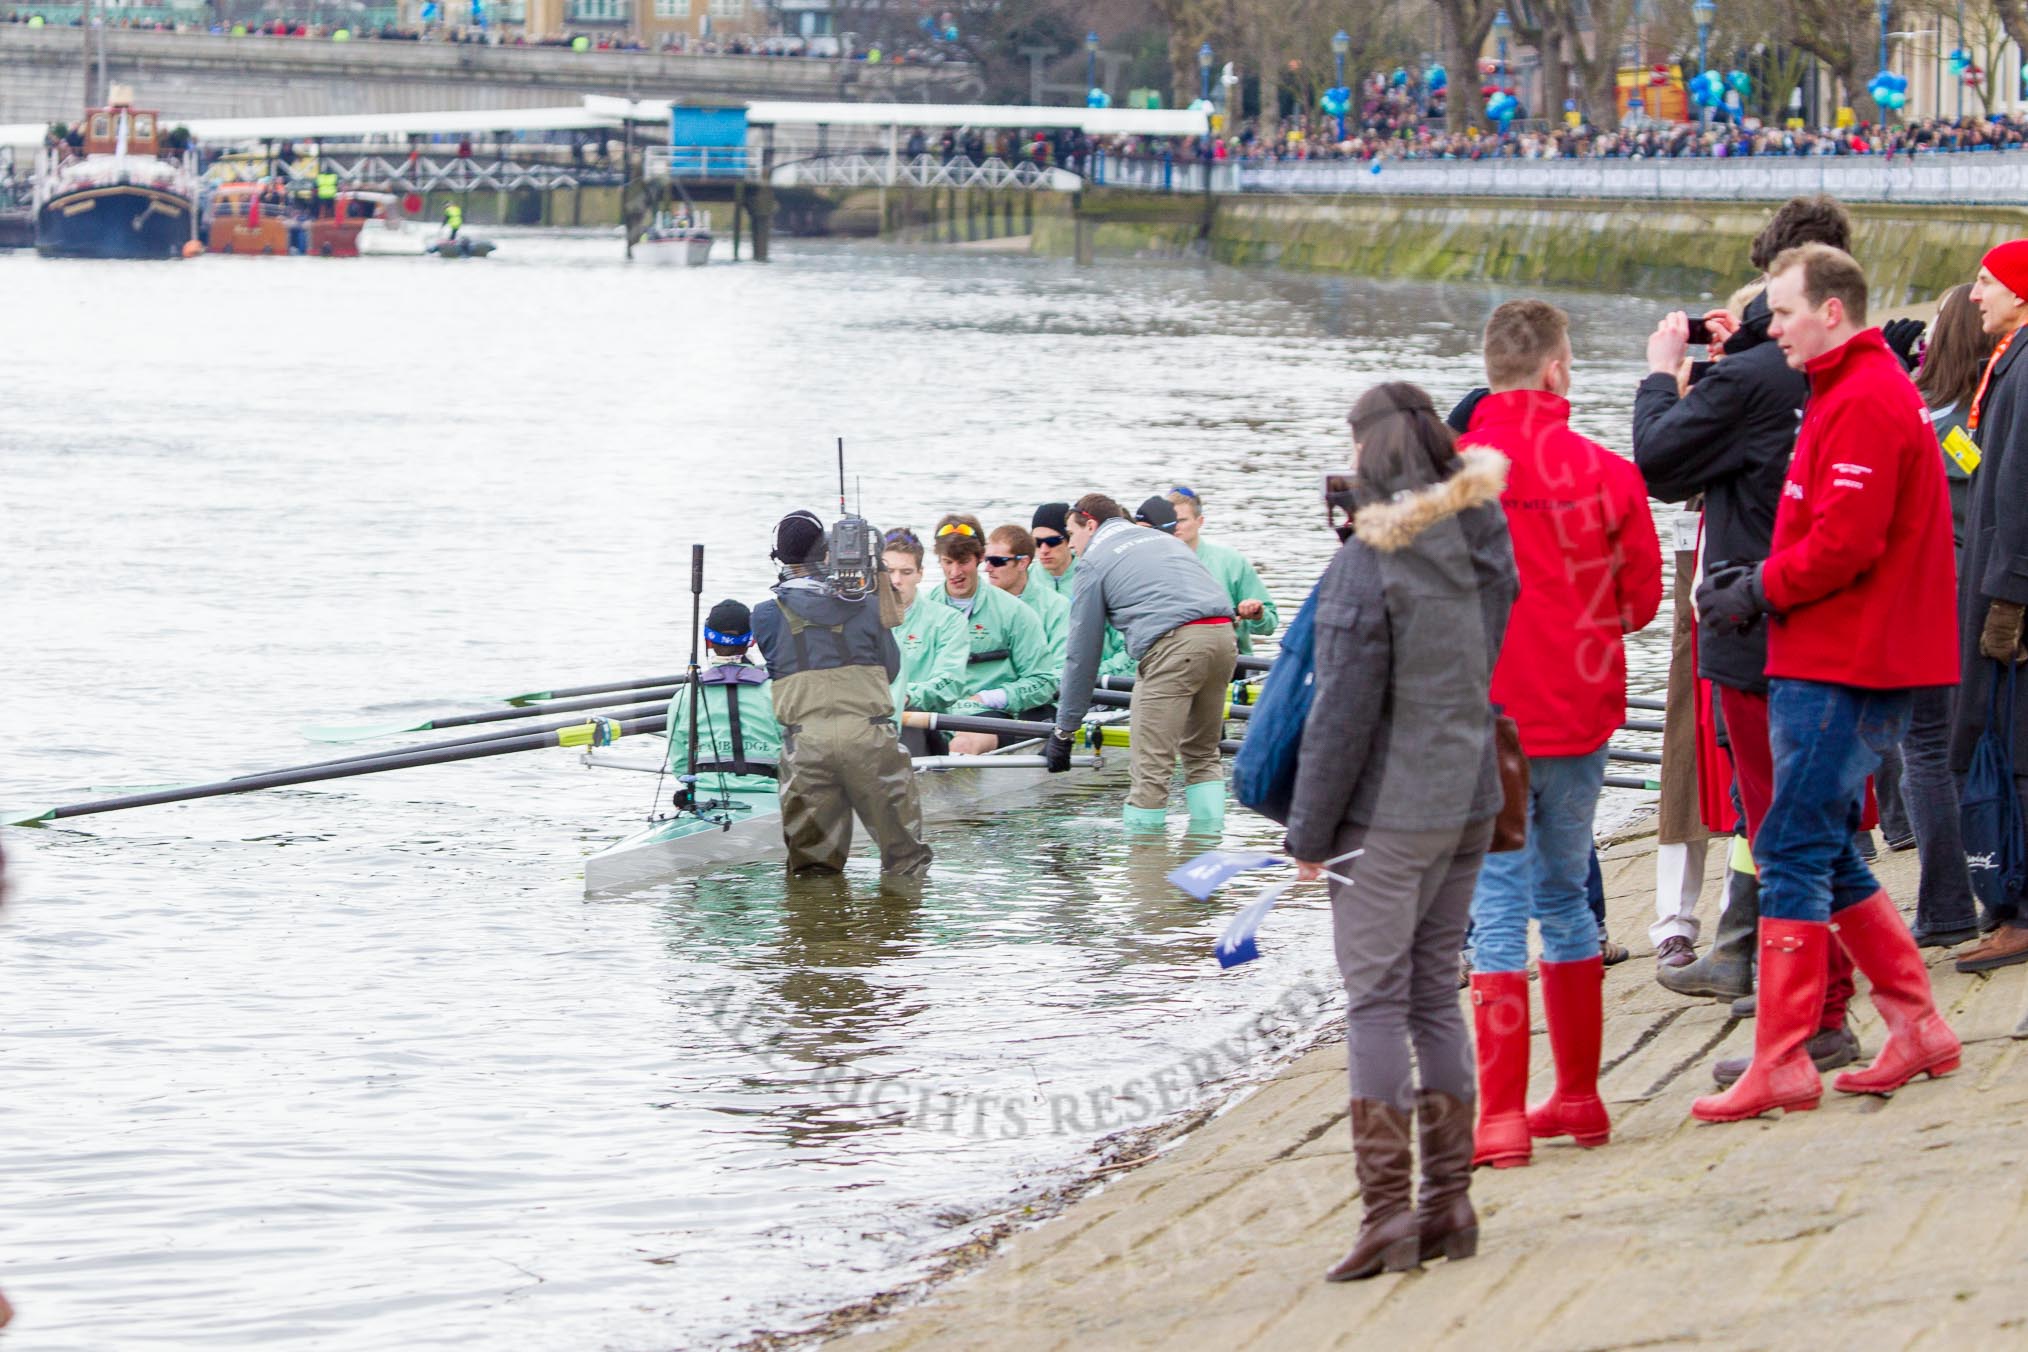 The Boat Race 2013.
Putney,
London SW15,

United Kingdom,
on 31 March 2013 at 15:49, image #174